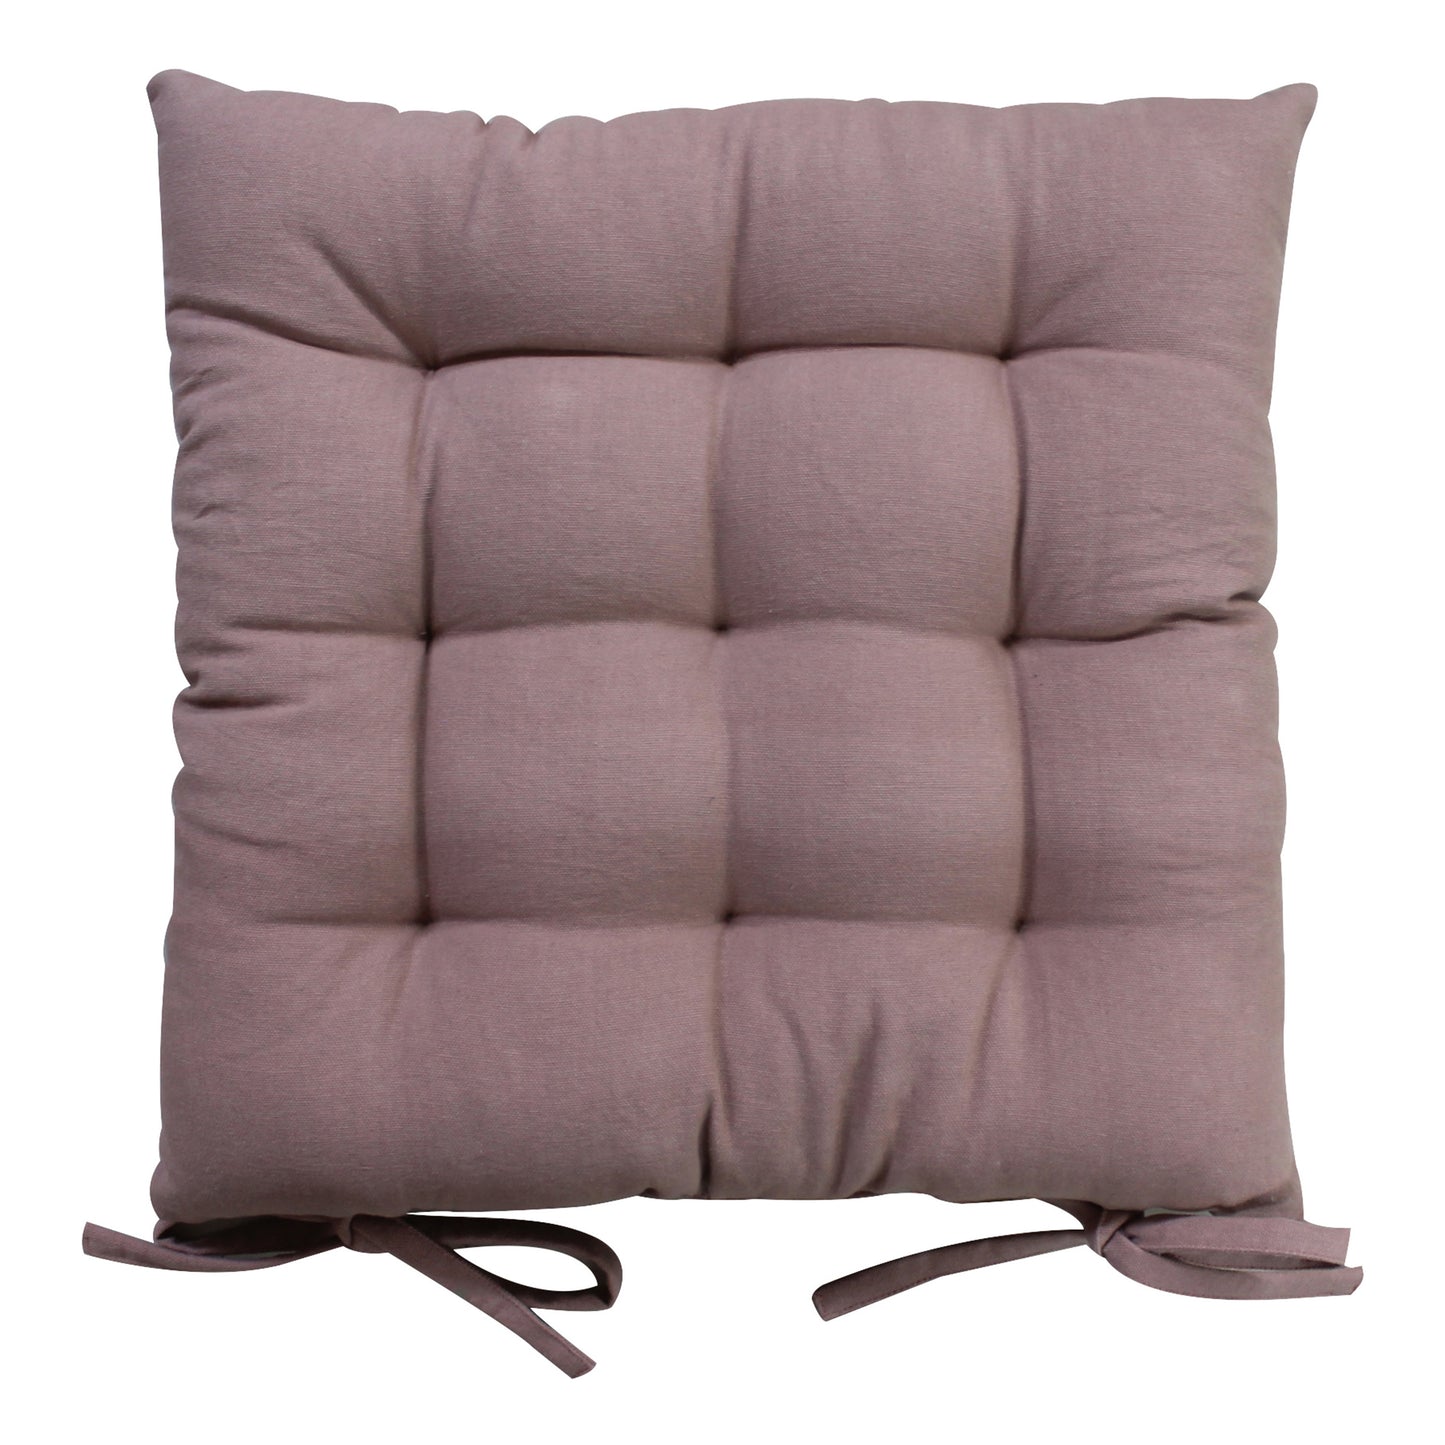 A Cotton Crinkle Seatpad Blush cushion for home furniture and interior decor from Kikiathome.co.uk.